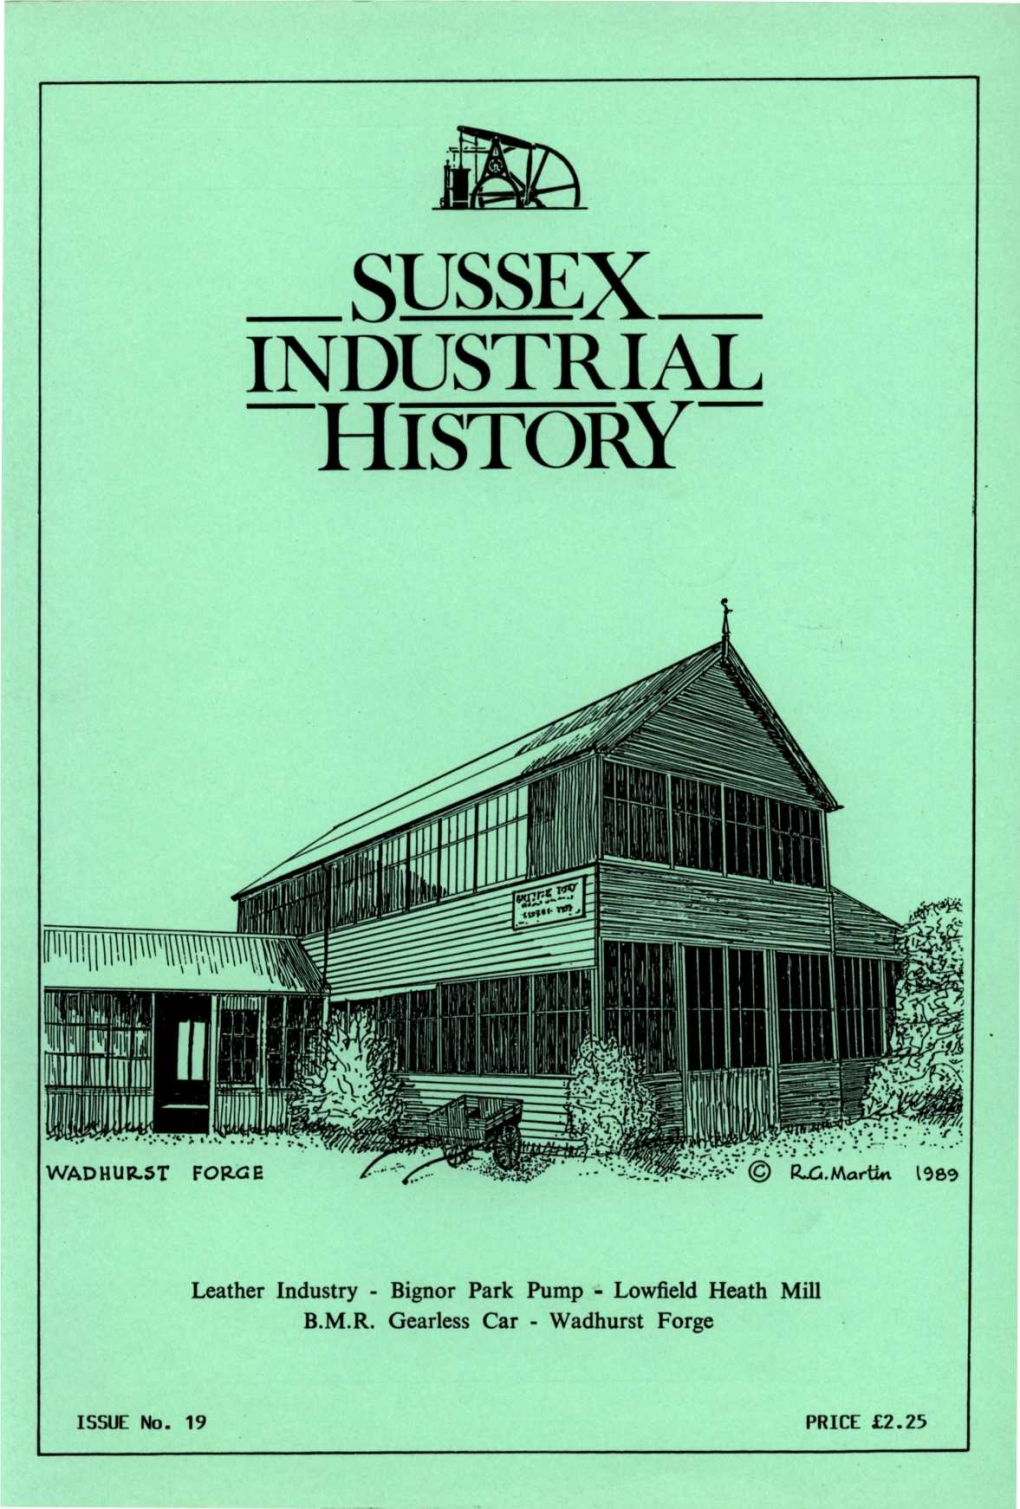 Sussex Industrial History